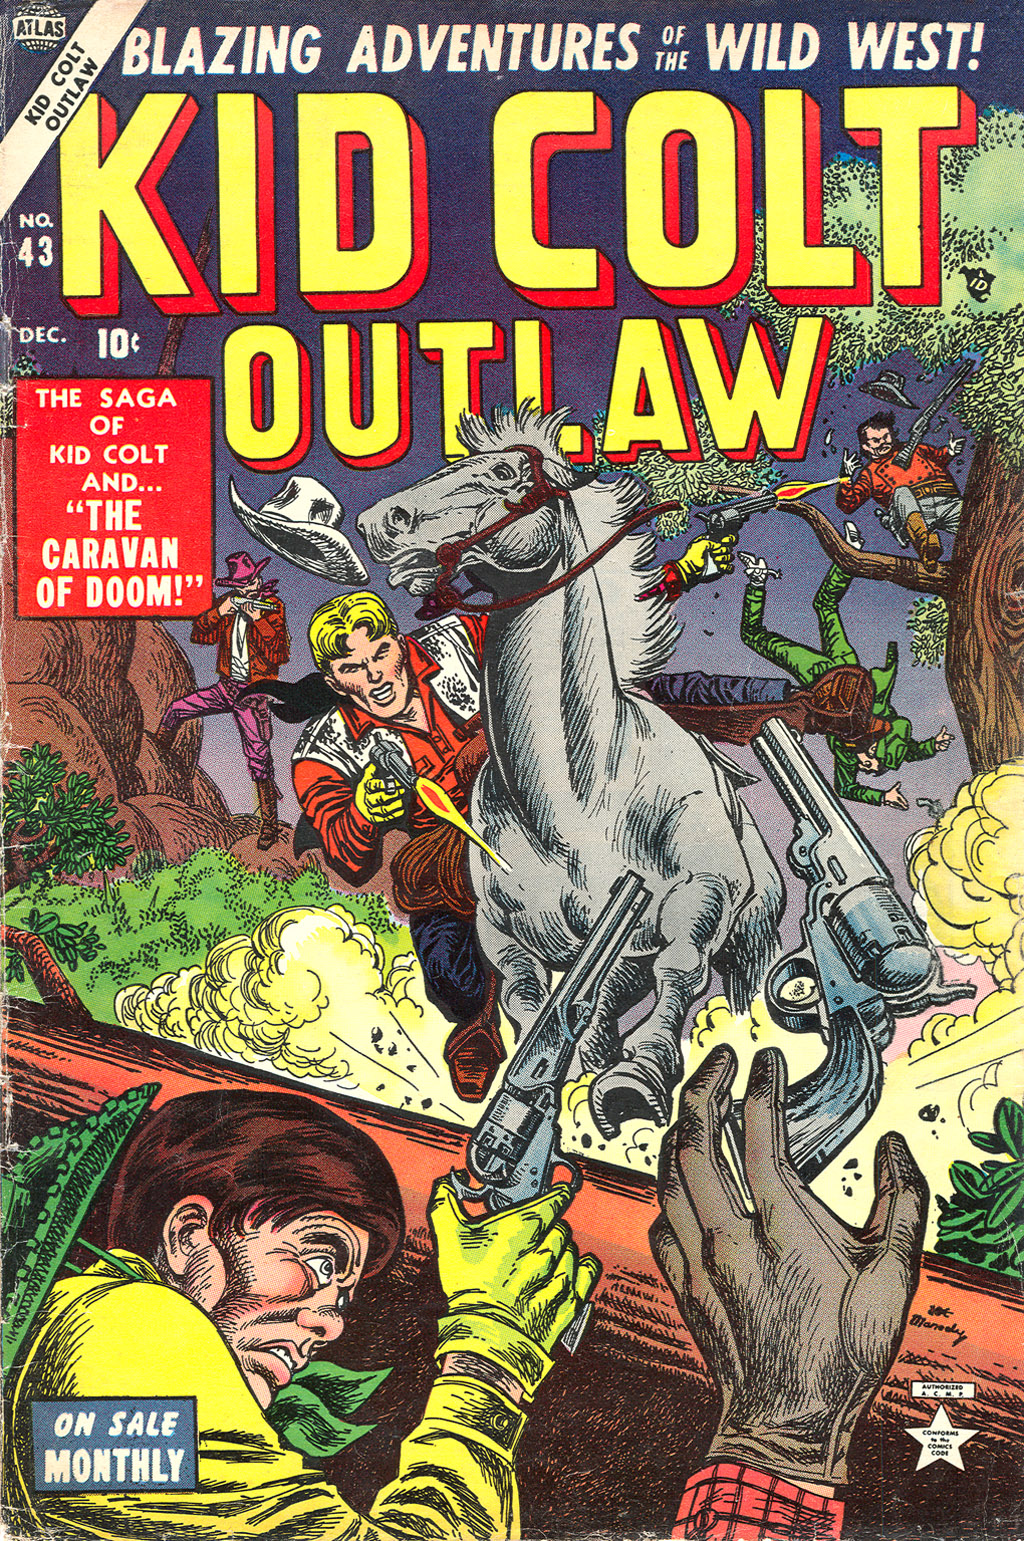 Read online Kid Colt Outlaw comic -  Issue #43 - 1